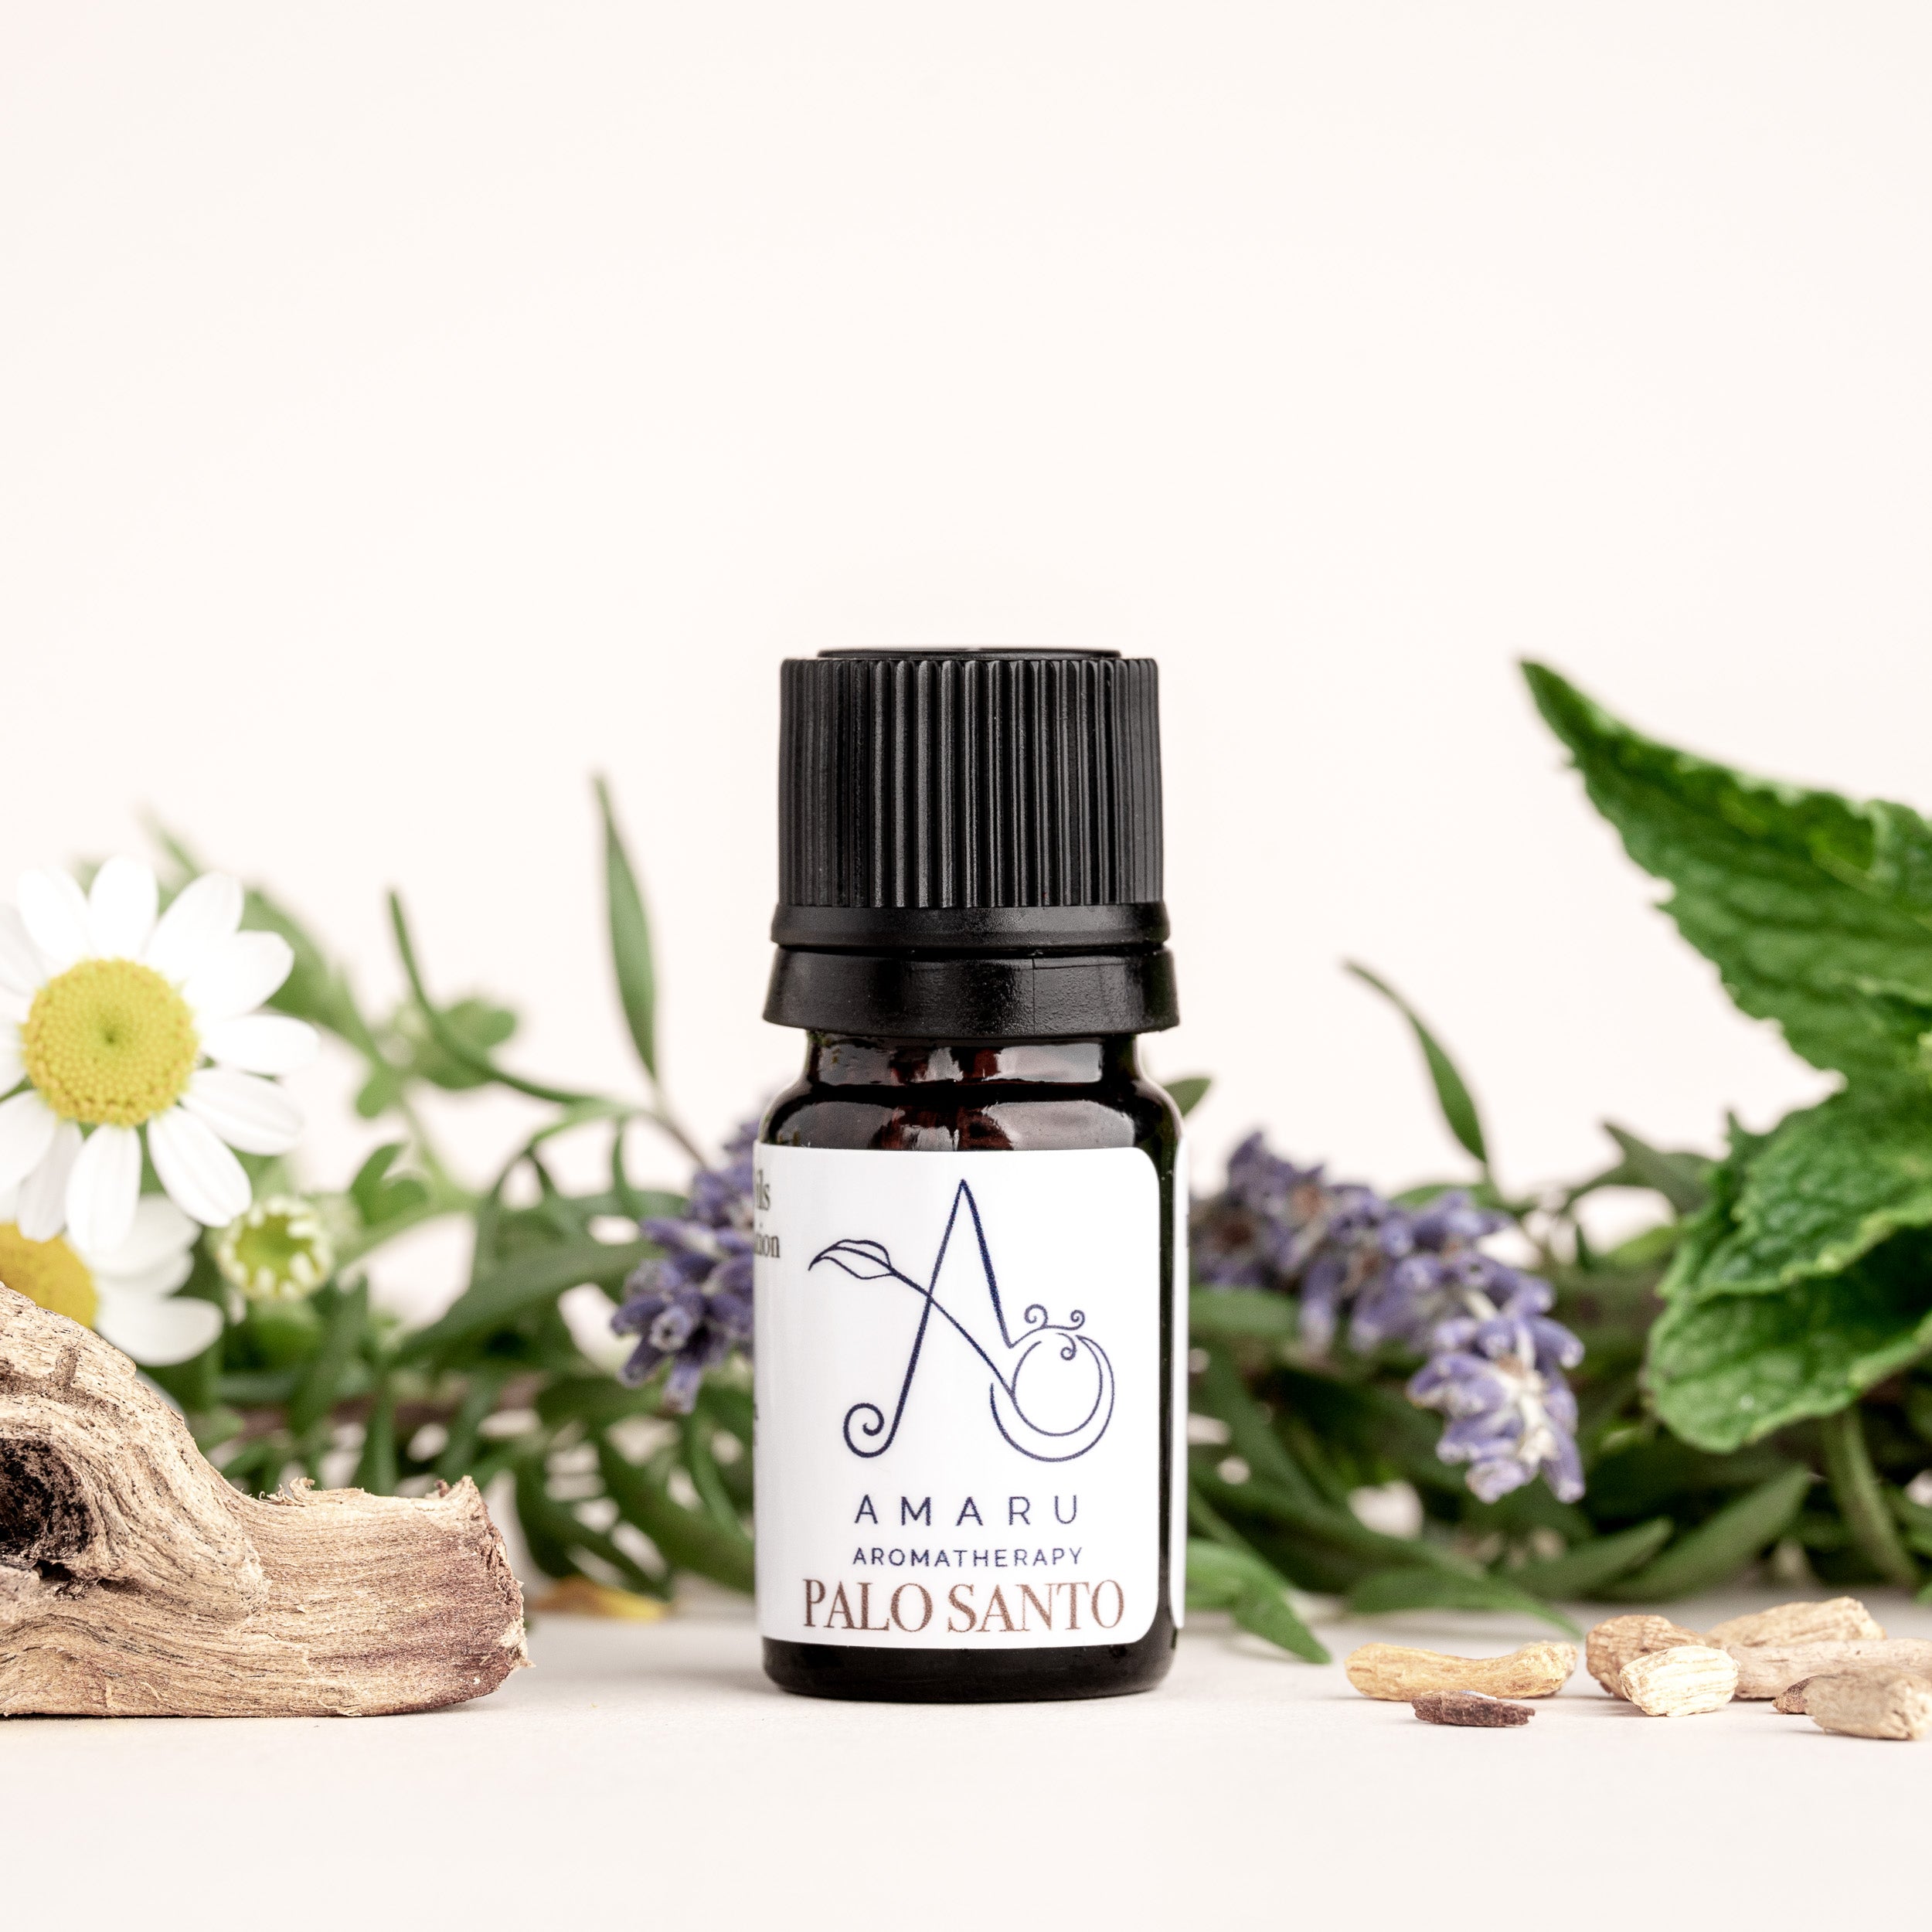 Rich and Empowering Essential Oil Palo Santo: Soothe Anxiety and Clear Obstacles and Negativity.